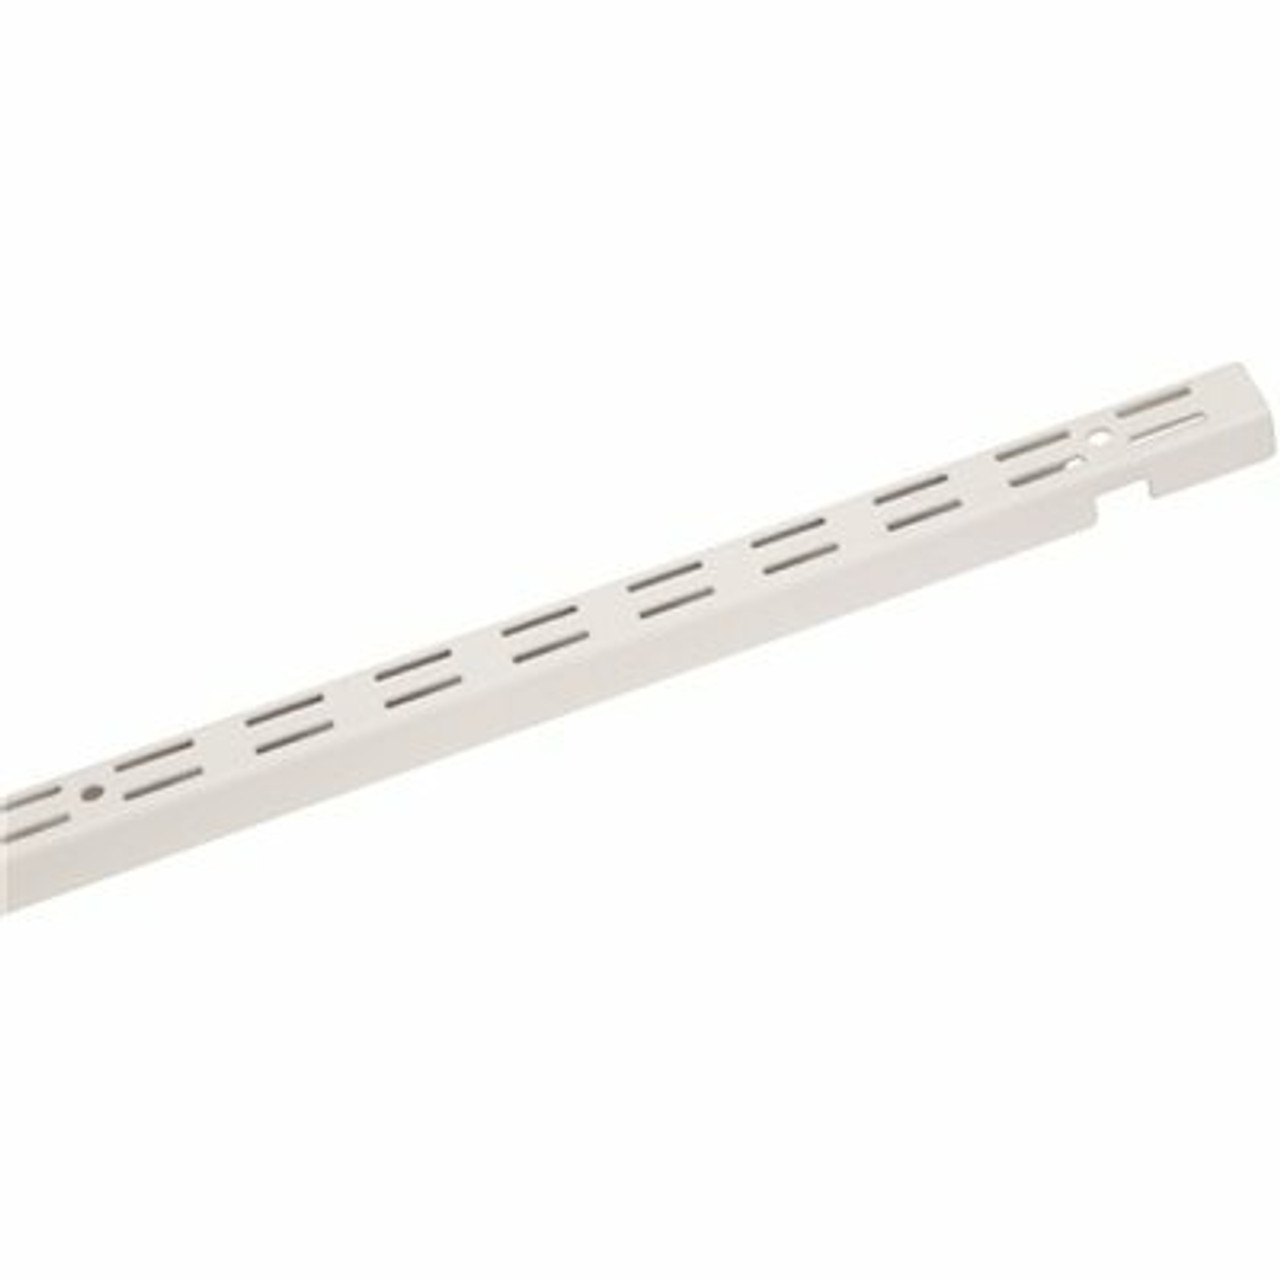 Closetmaid Shelftrack 12 In. X 1In. White Standard For Wire Shelving